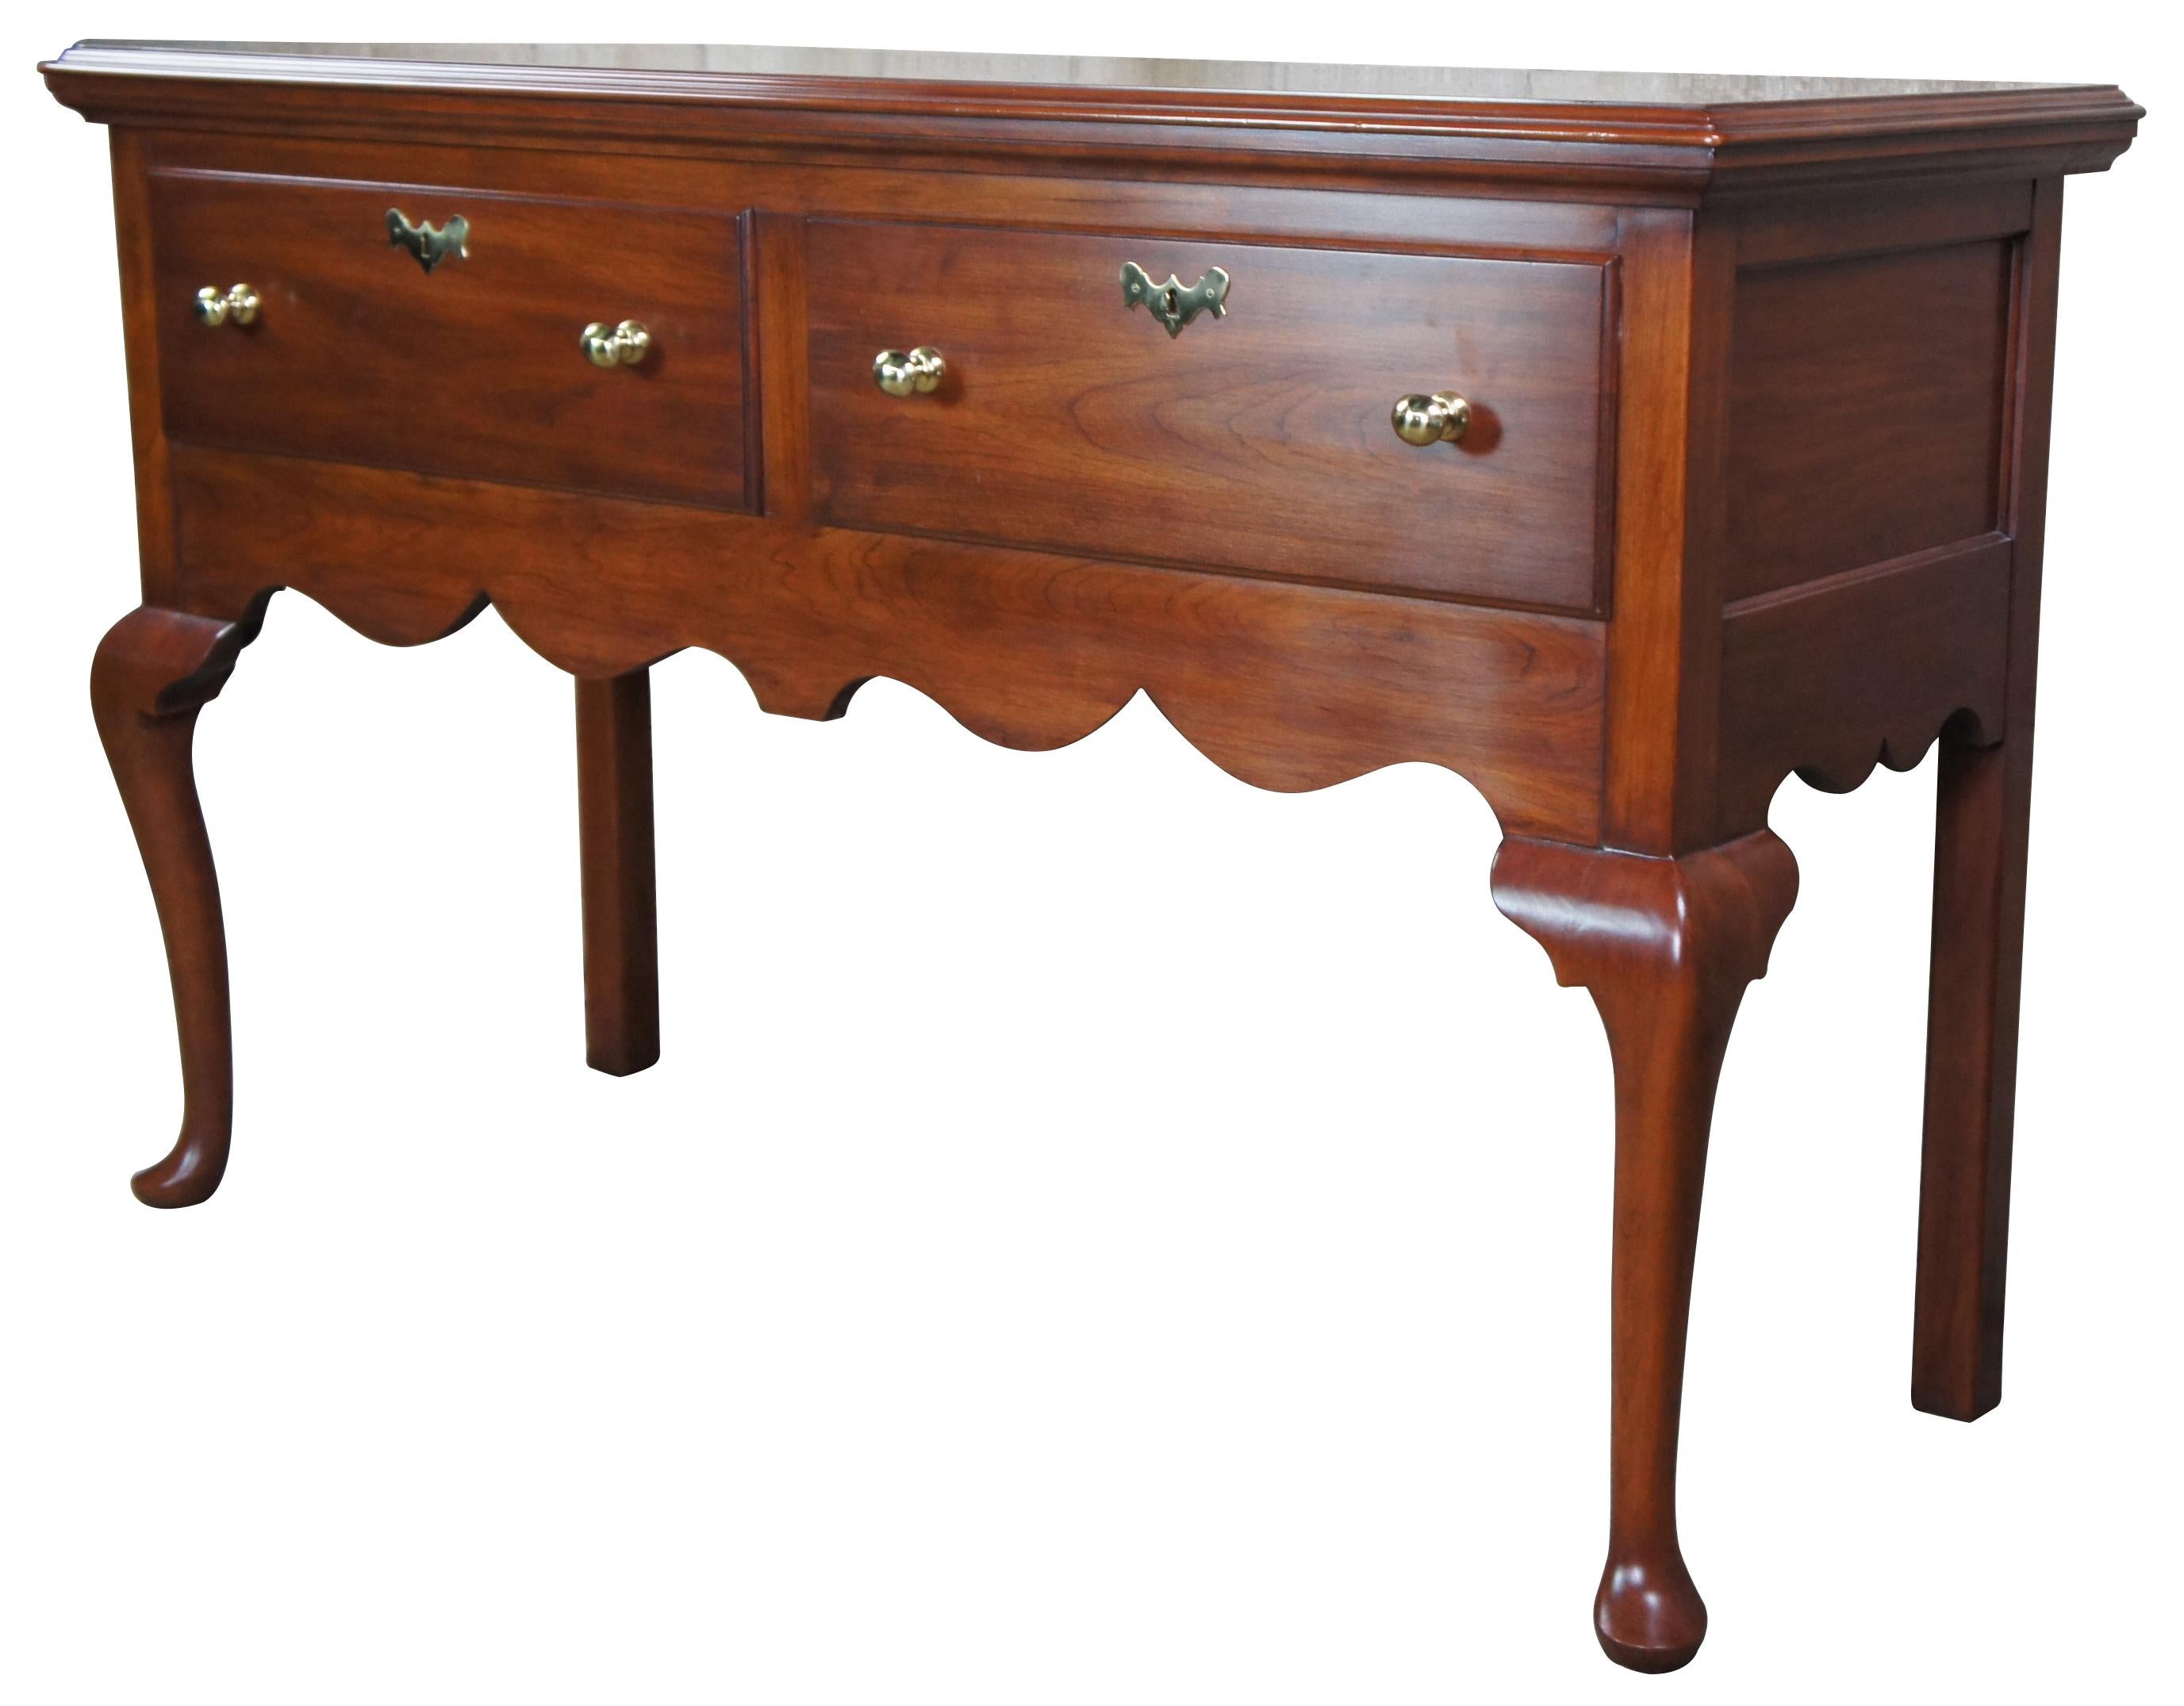 Vintage 1986 Hinkel Harris Jamestown Colony Wild Black Cherry buffet or sideboard. A rectangular form with 2 large drawers with brass knobs and colonial escutcheons over a serpentine cut apron. Supported by cabriole legs with pad feet and squared